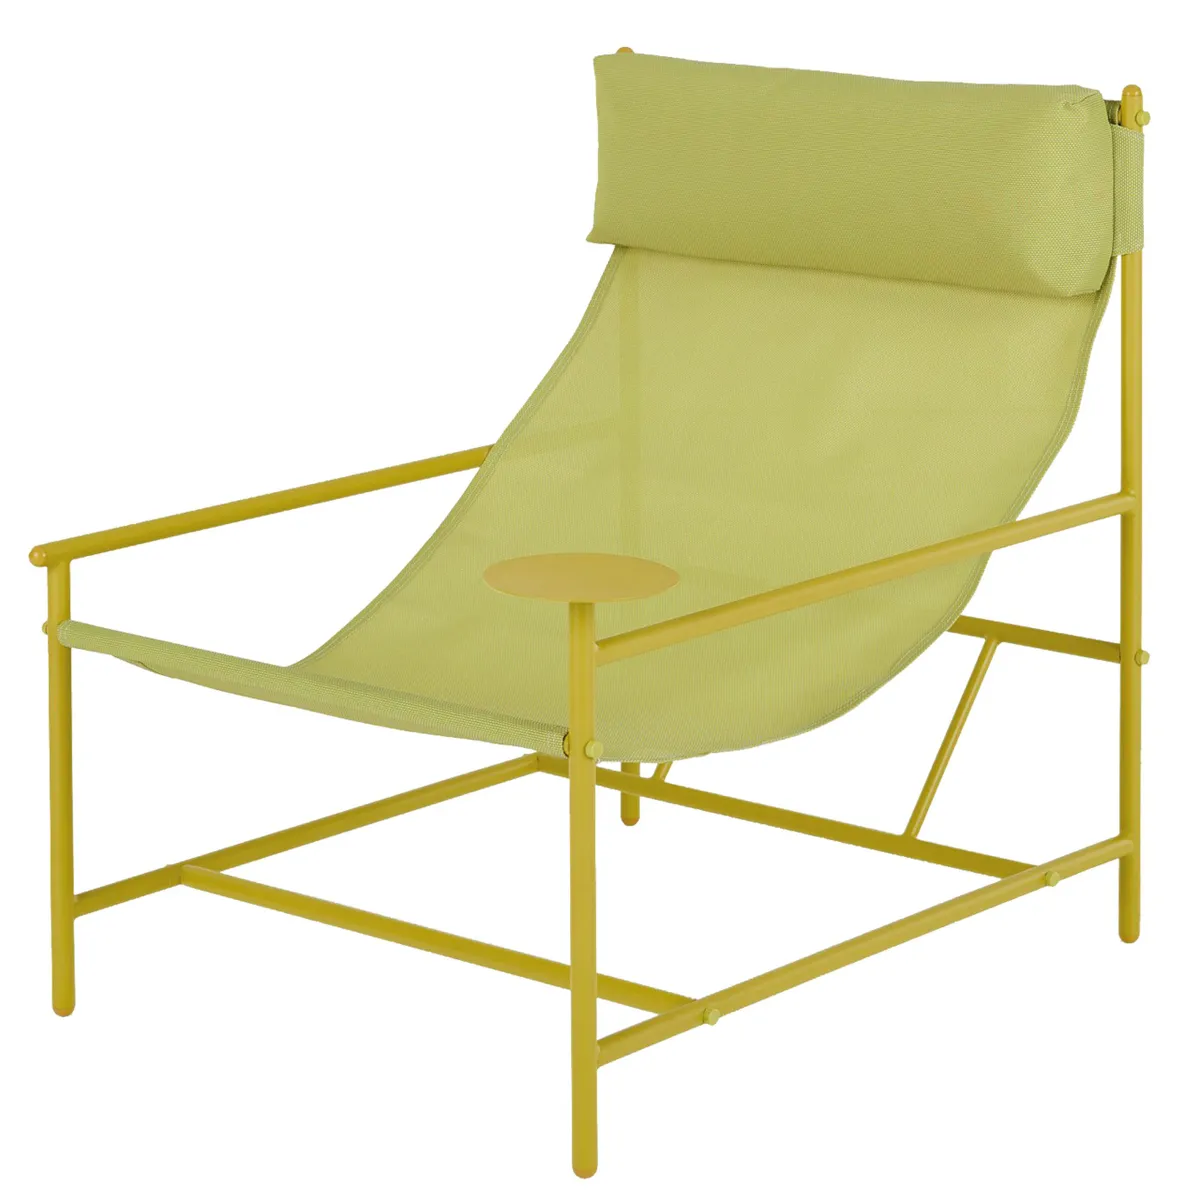 Make your garden feel like a second living room with armchair-style outdoor seating. Essentials Danta garden chair, £69, MADE.com